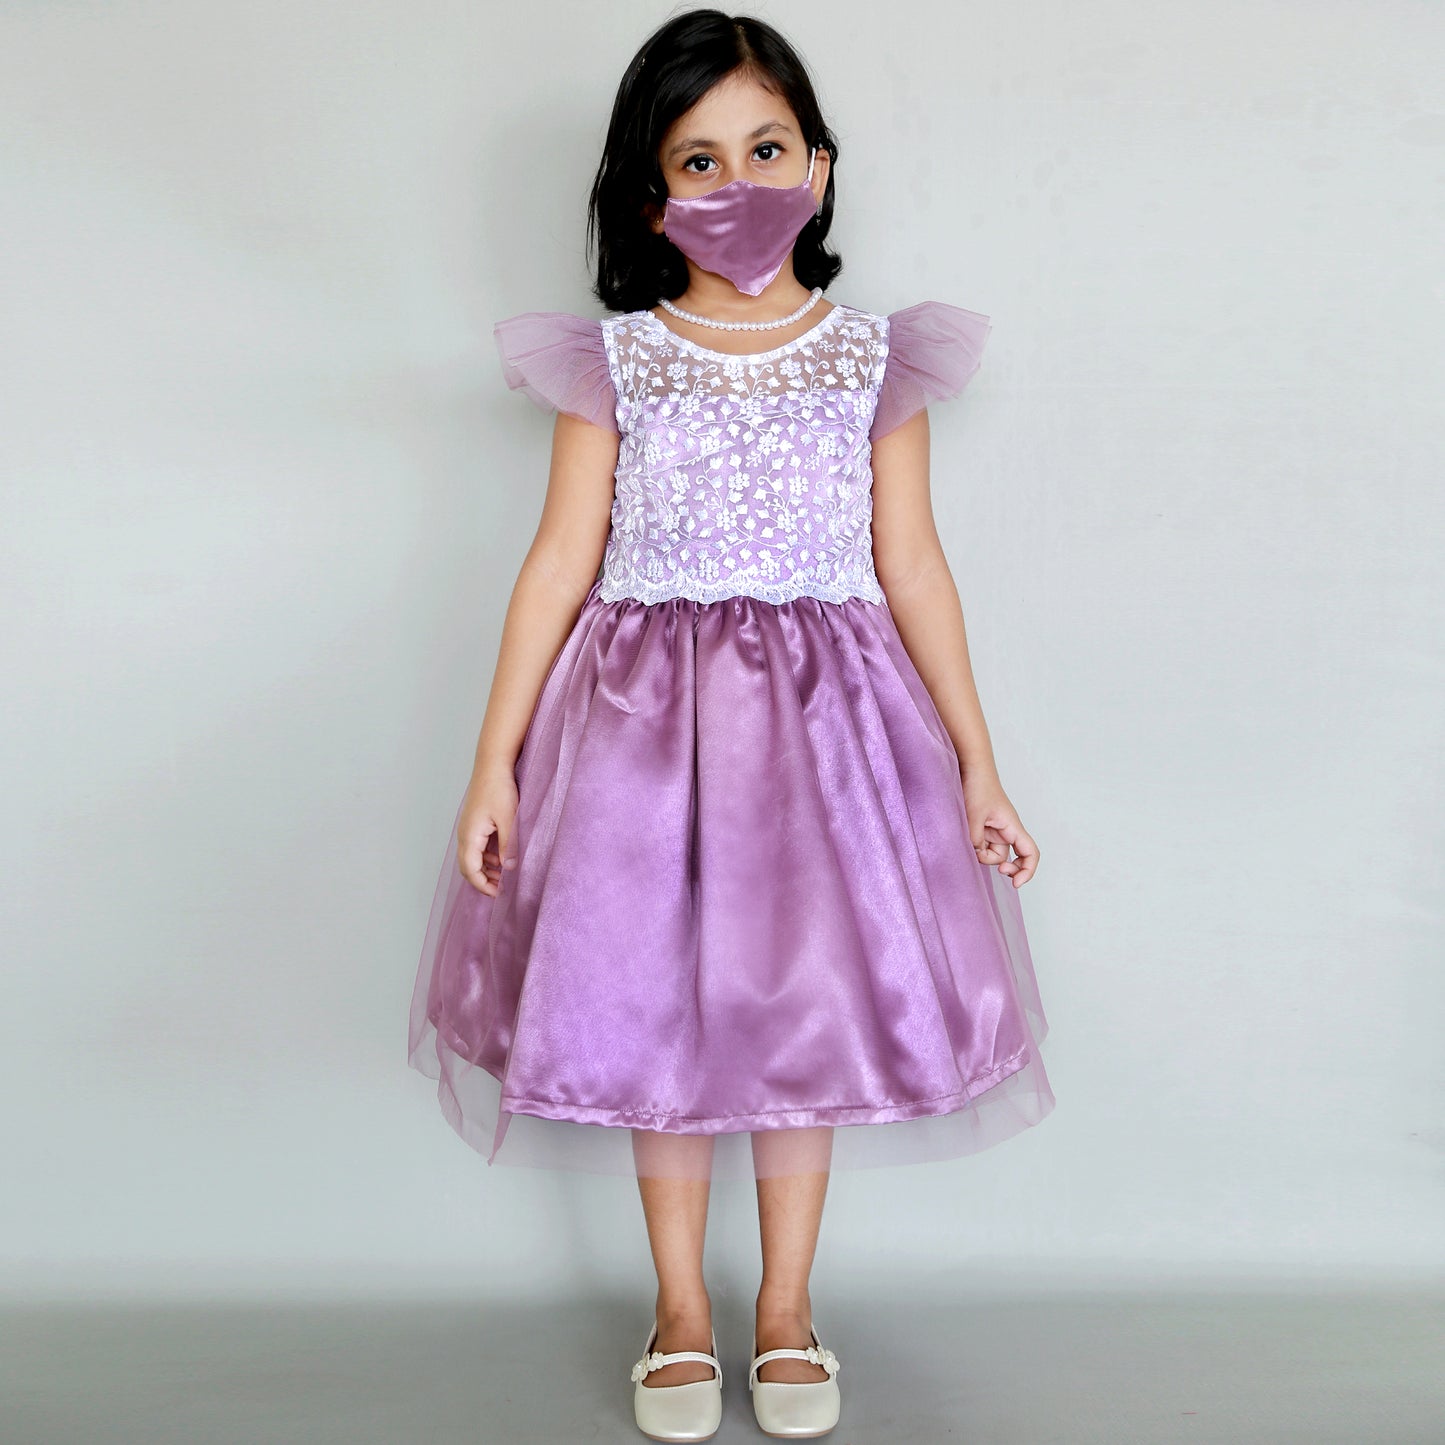 HEYKIDOO Unique designer dresses kids girls stylish comfortable birthday frocks online casual Party wear dress floral embroidered elegant peach fashionable 3 years stylish children clothing